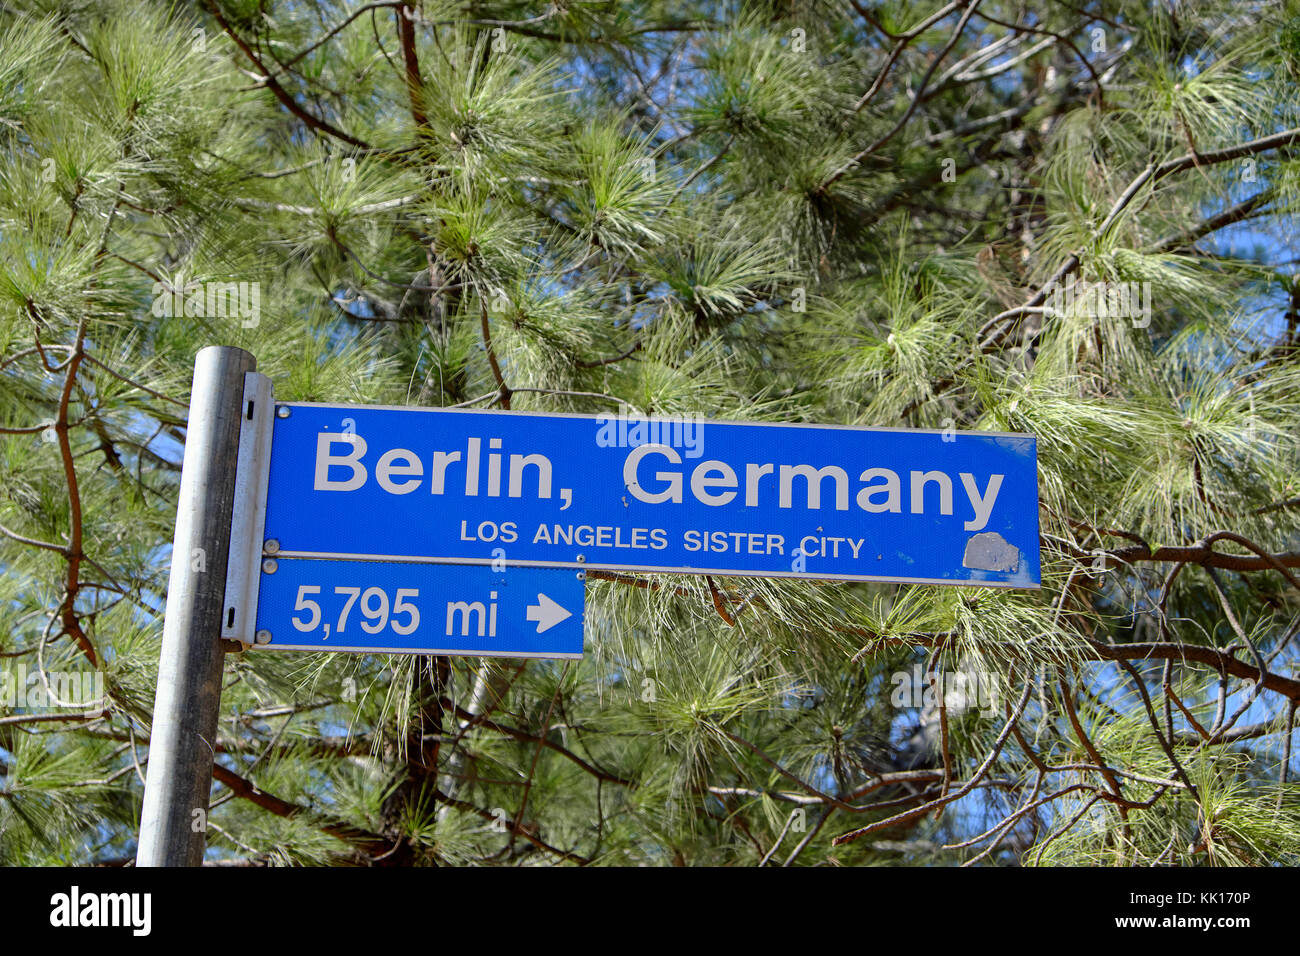 Berlin, Germany, Los Angeles Sister City sign at Griffith Park, Los Angeles, California USA  KATHY DEWITT Stock Photo